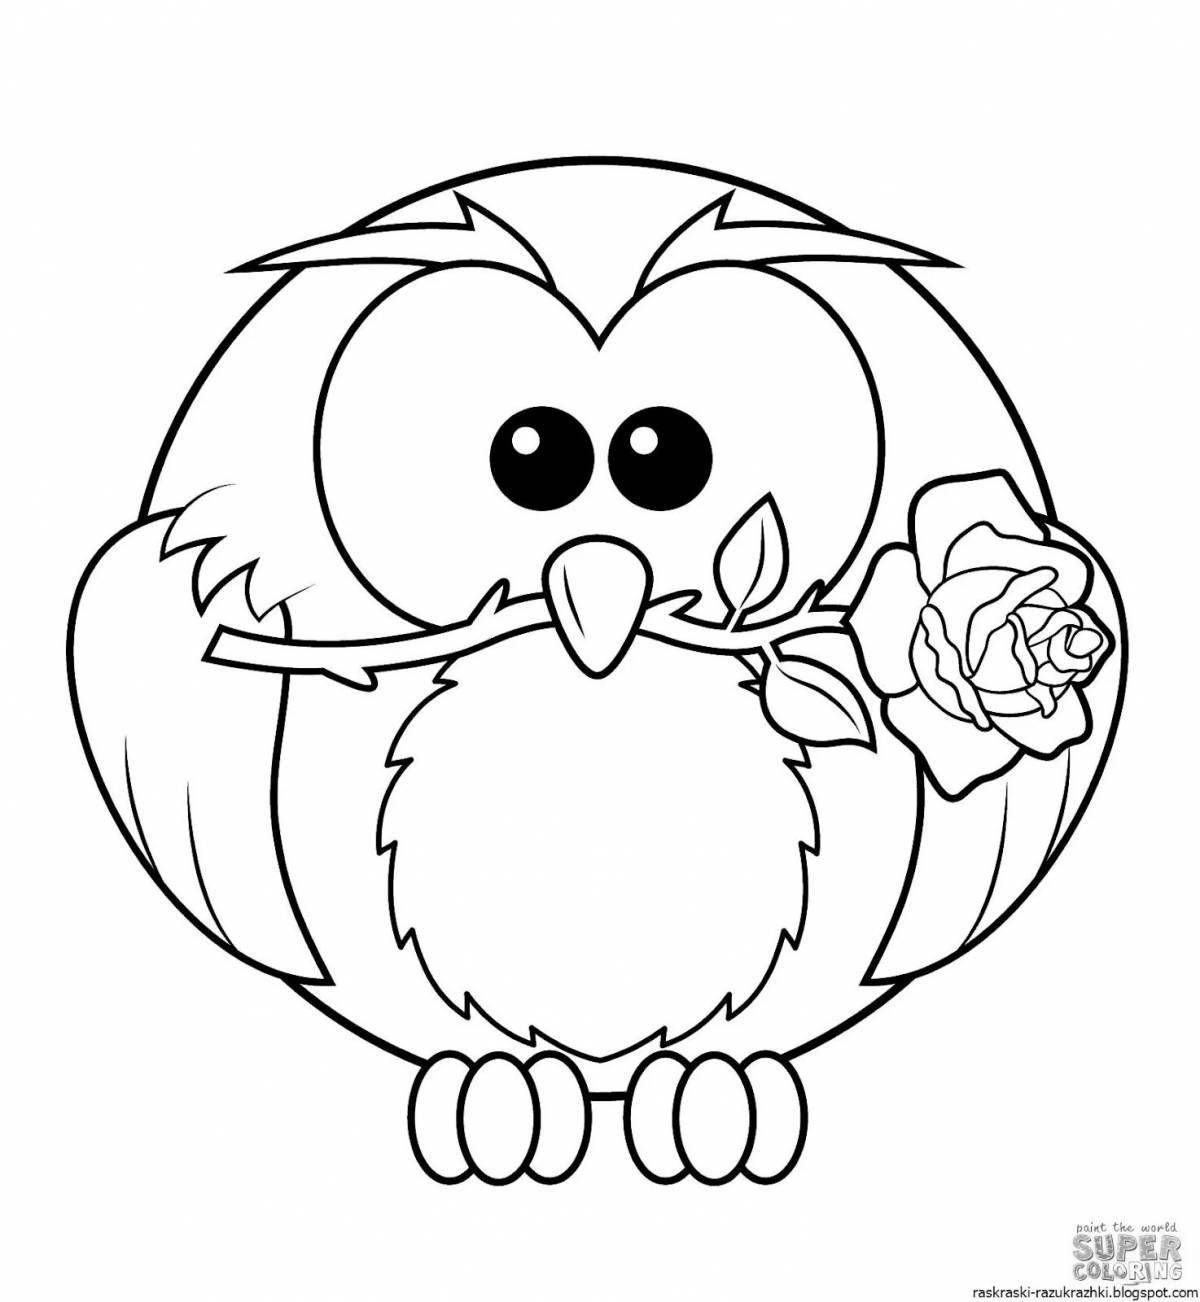 Amazing Owl Coloring Page for Toddlers